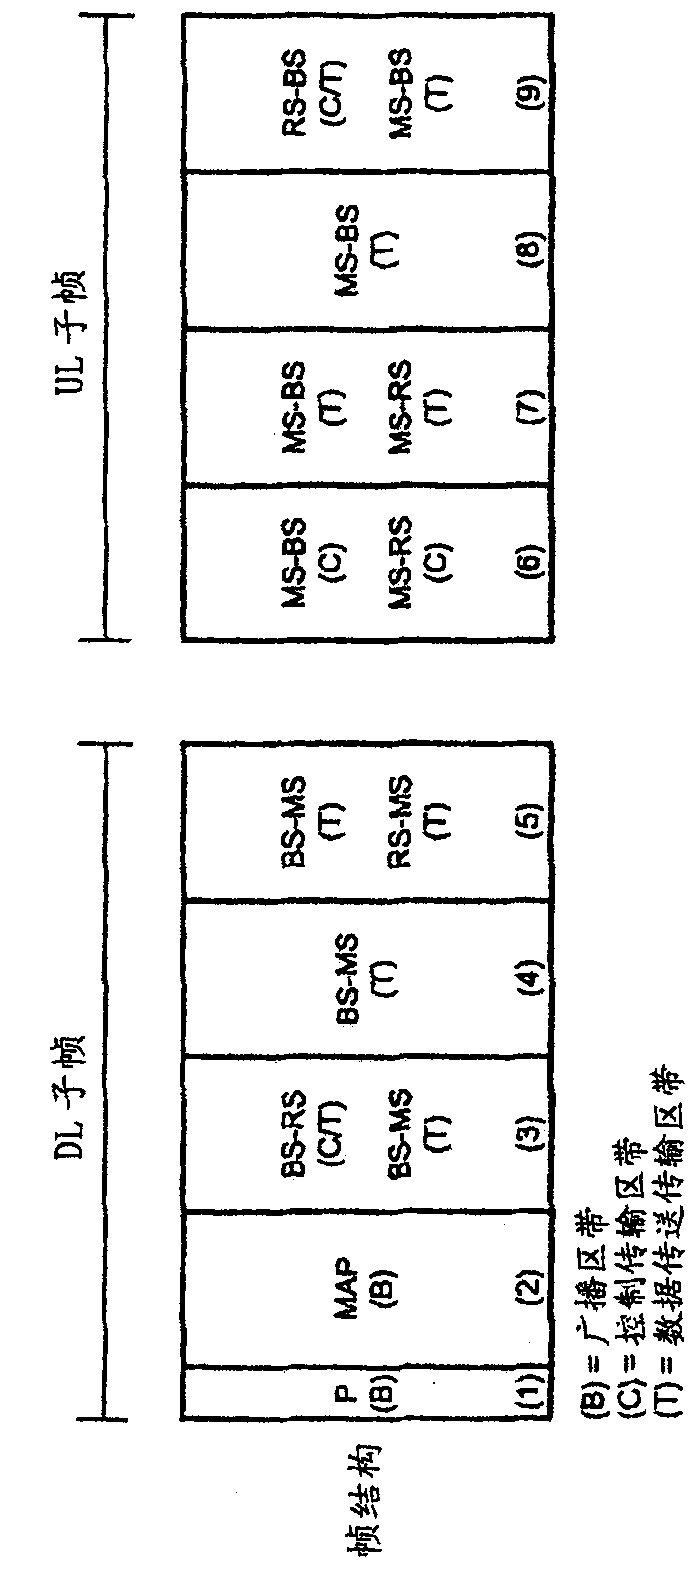 Multi-hop wireless communication system and method